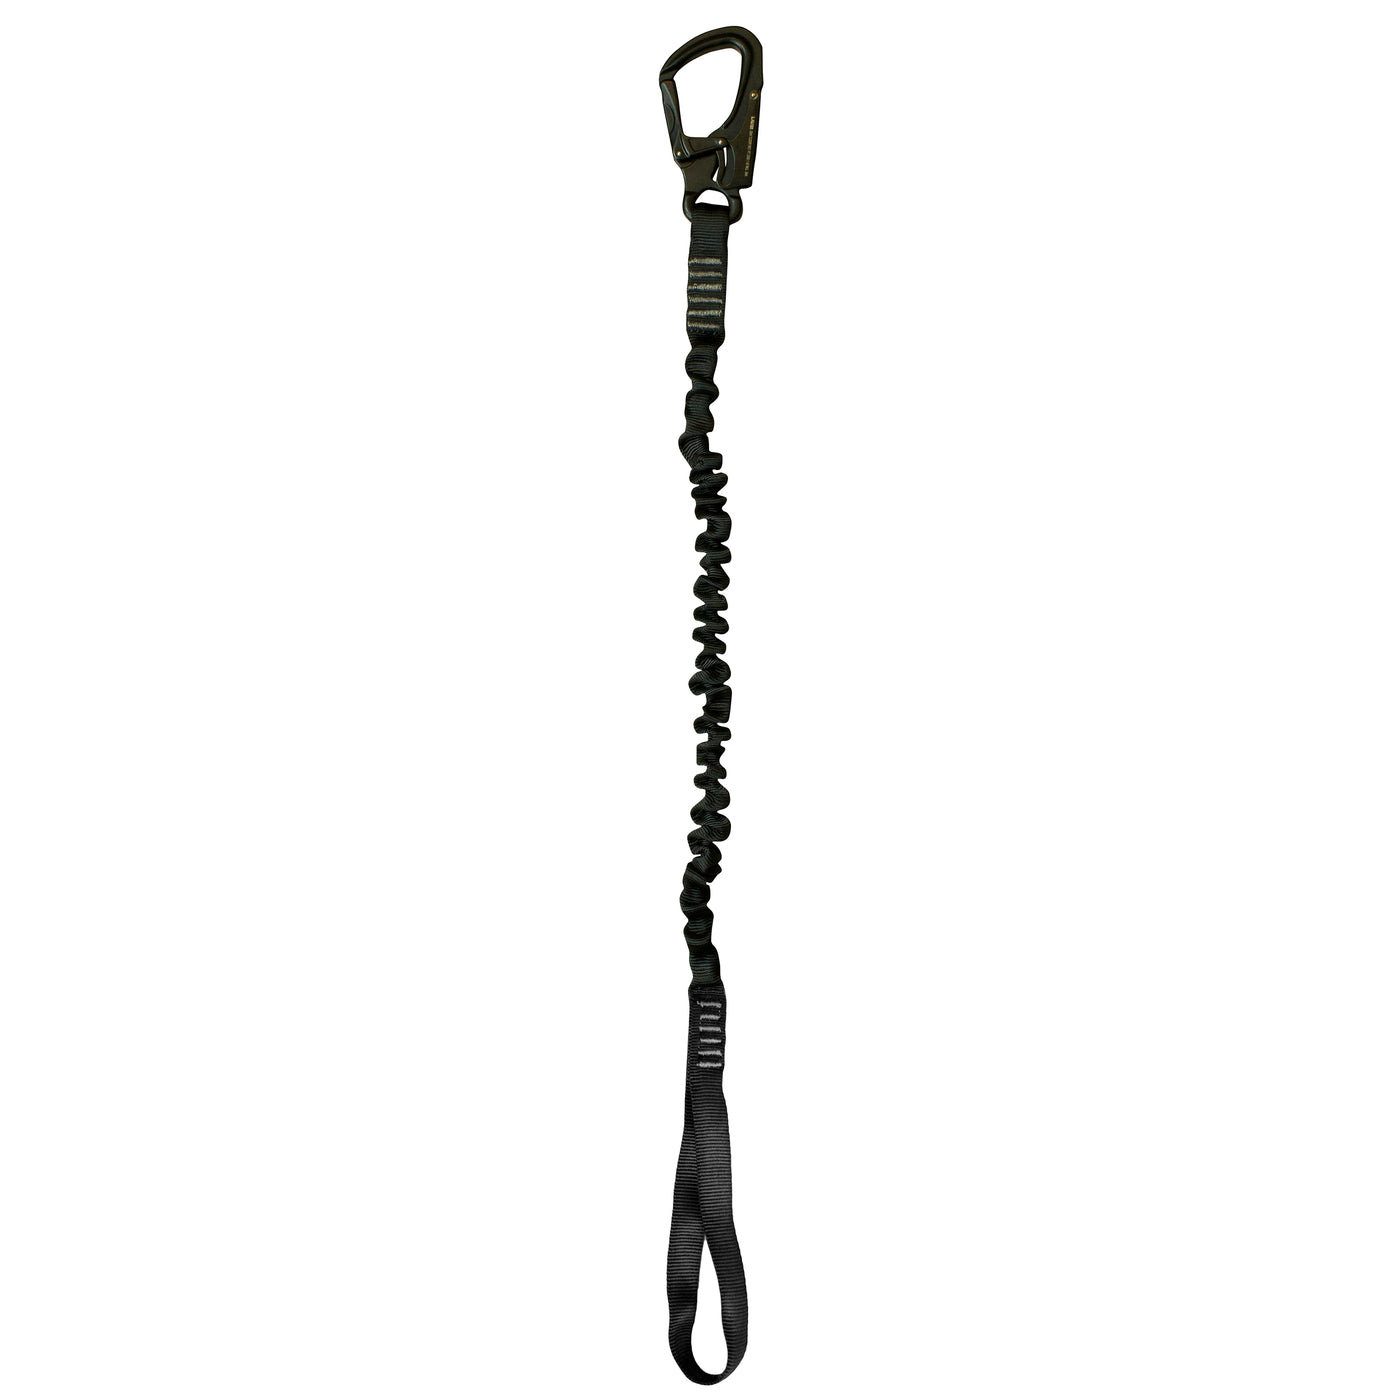 Retention Lanyard – Helo Lanyard with Snap Hook & Hitched Loop